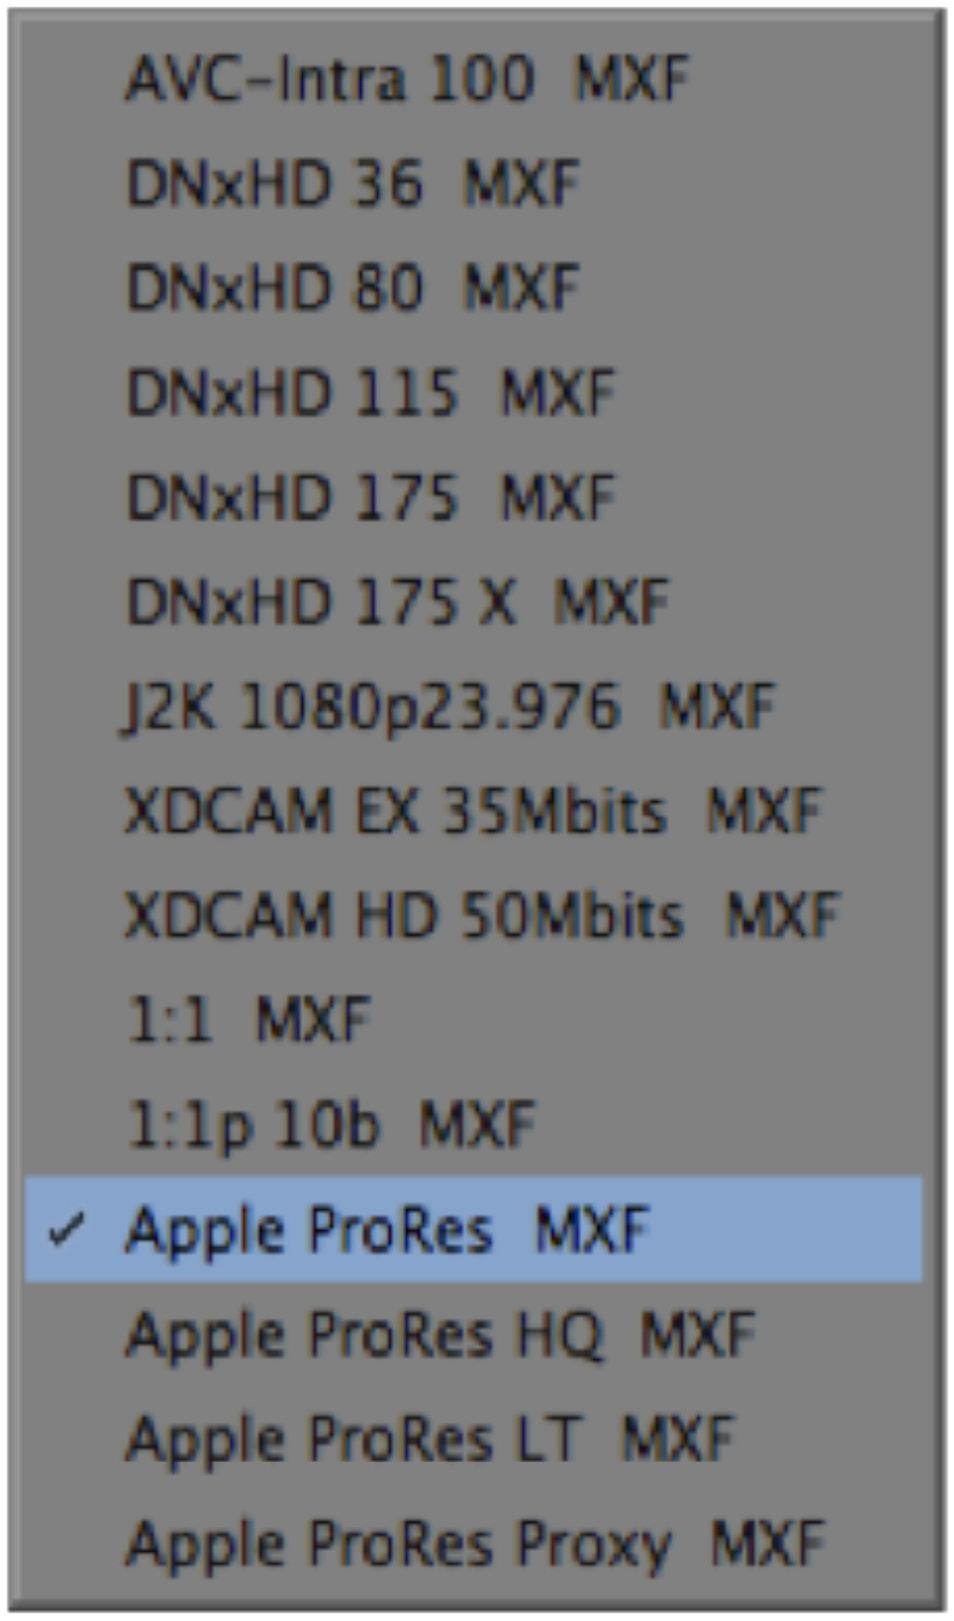 Continuing with your ProRes workflow Along with Avid DNxHD, Apple ProRes has become a staple codec in the industry.